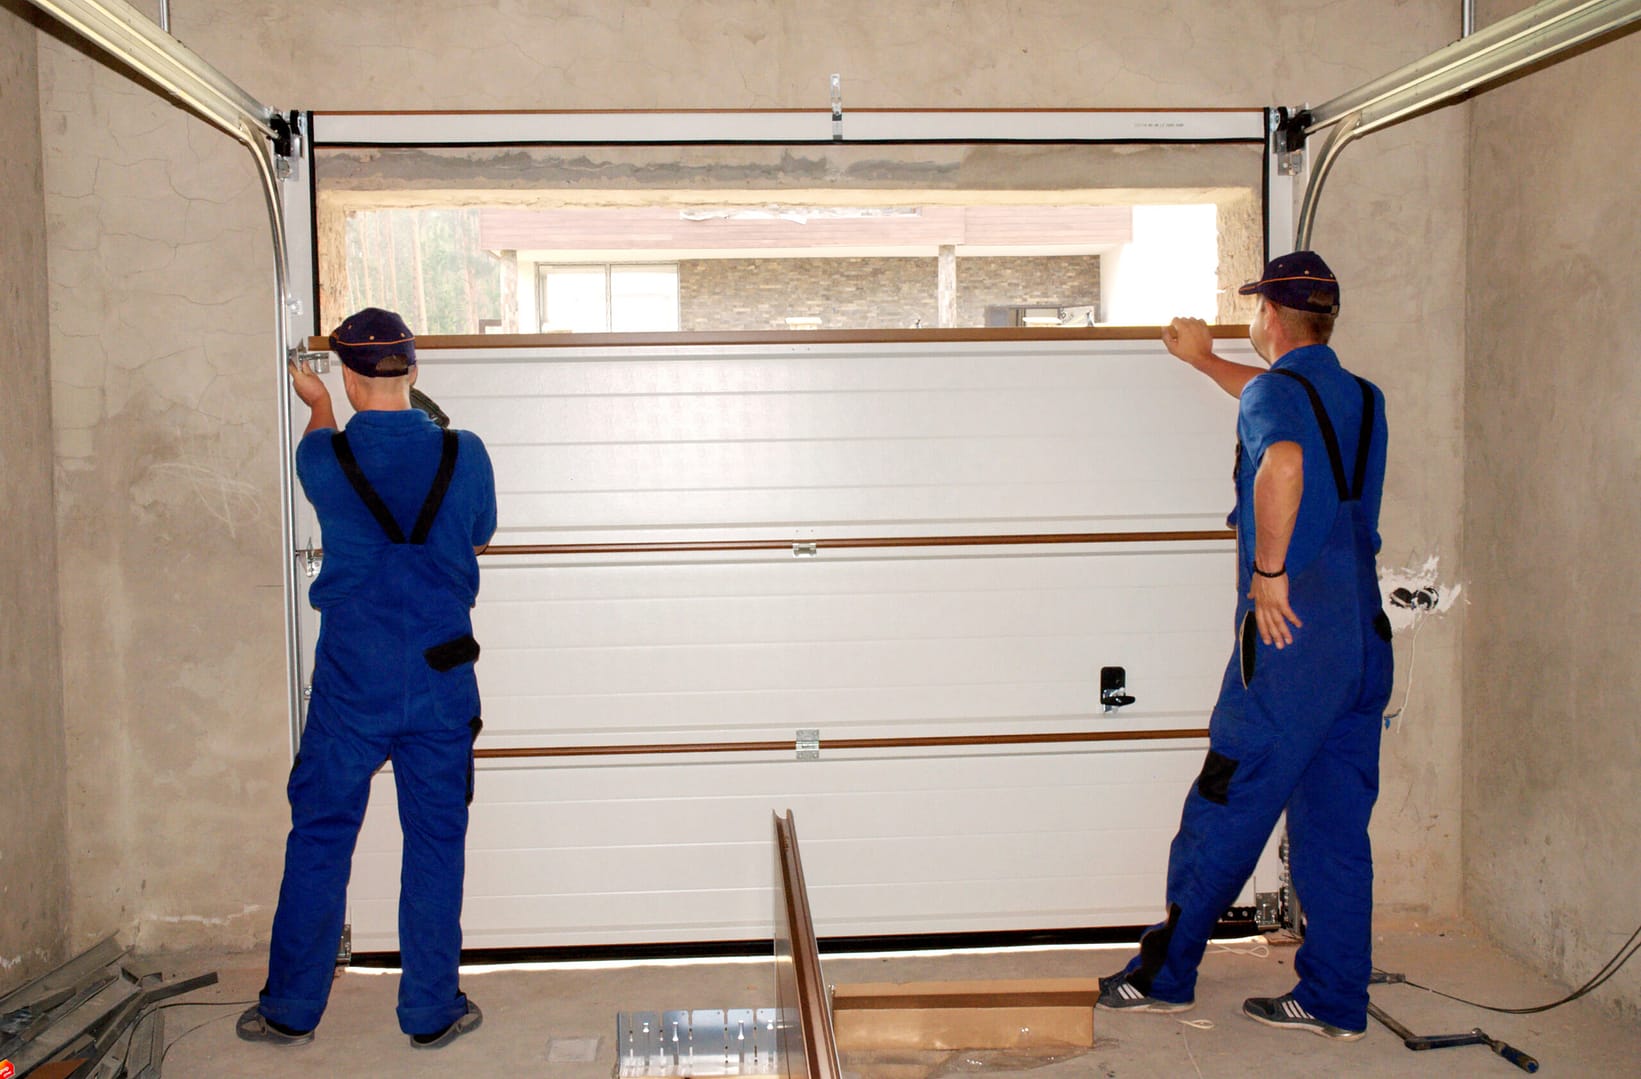 Contractors skillfully installing, repairing, and insulating a garage door with precision and expertise.